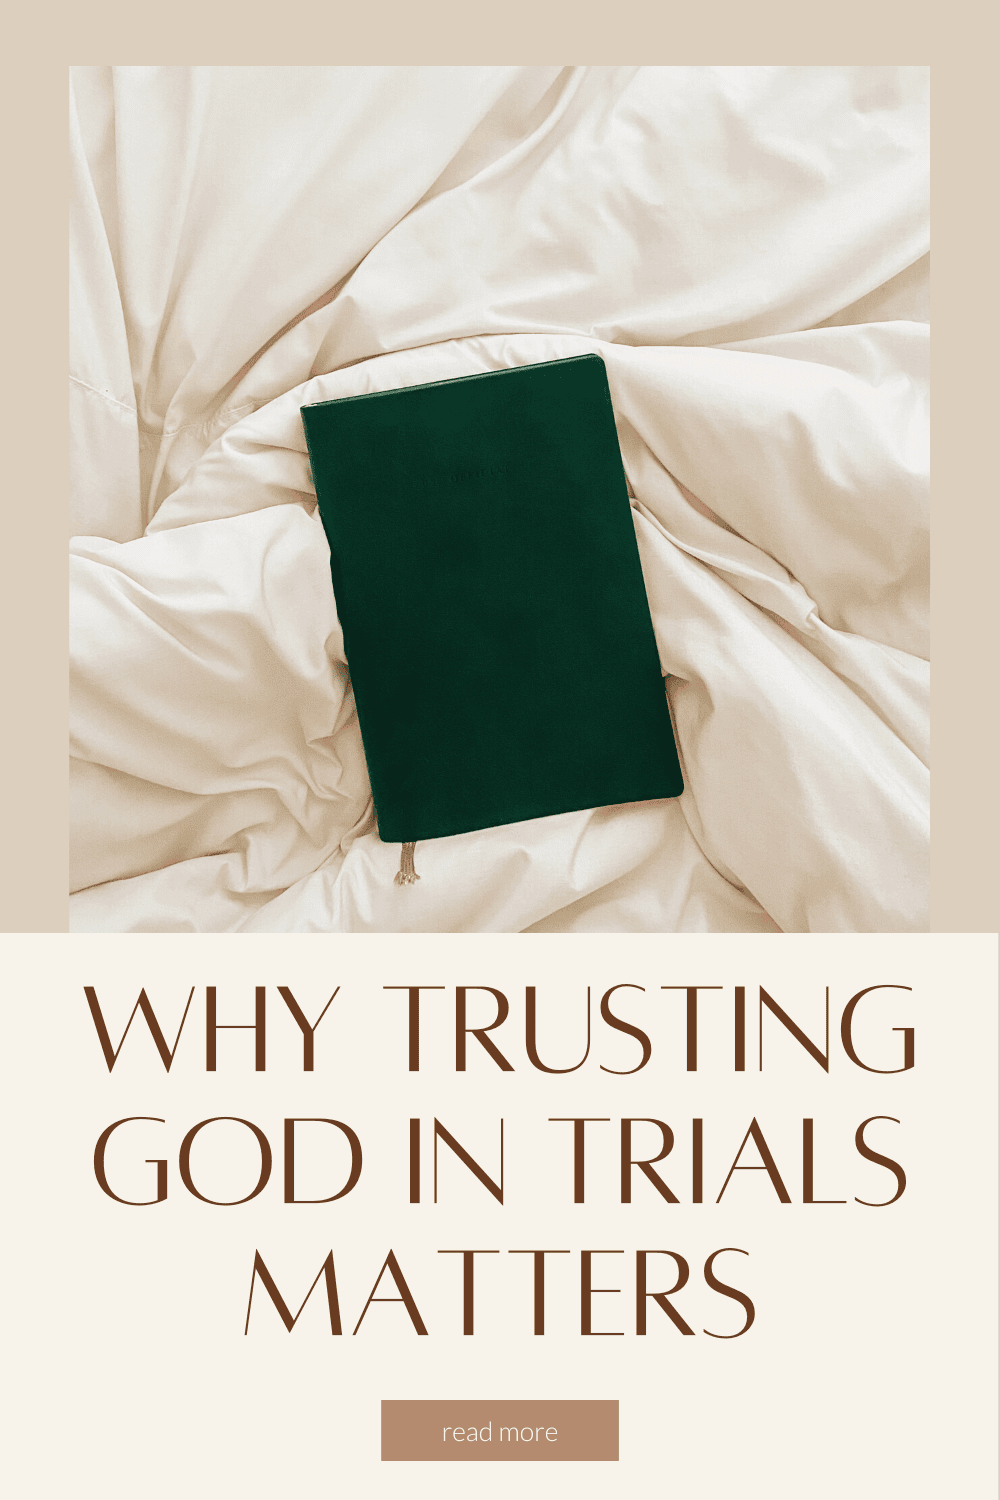 Why Trusting God Through Trials Matters